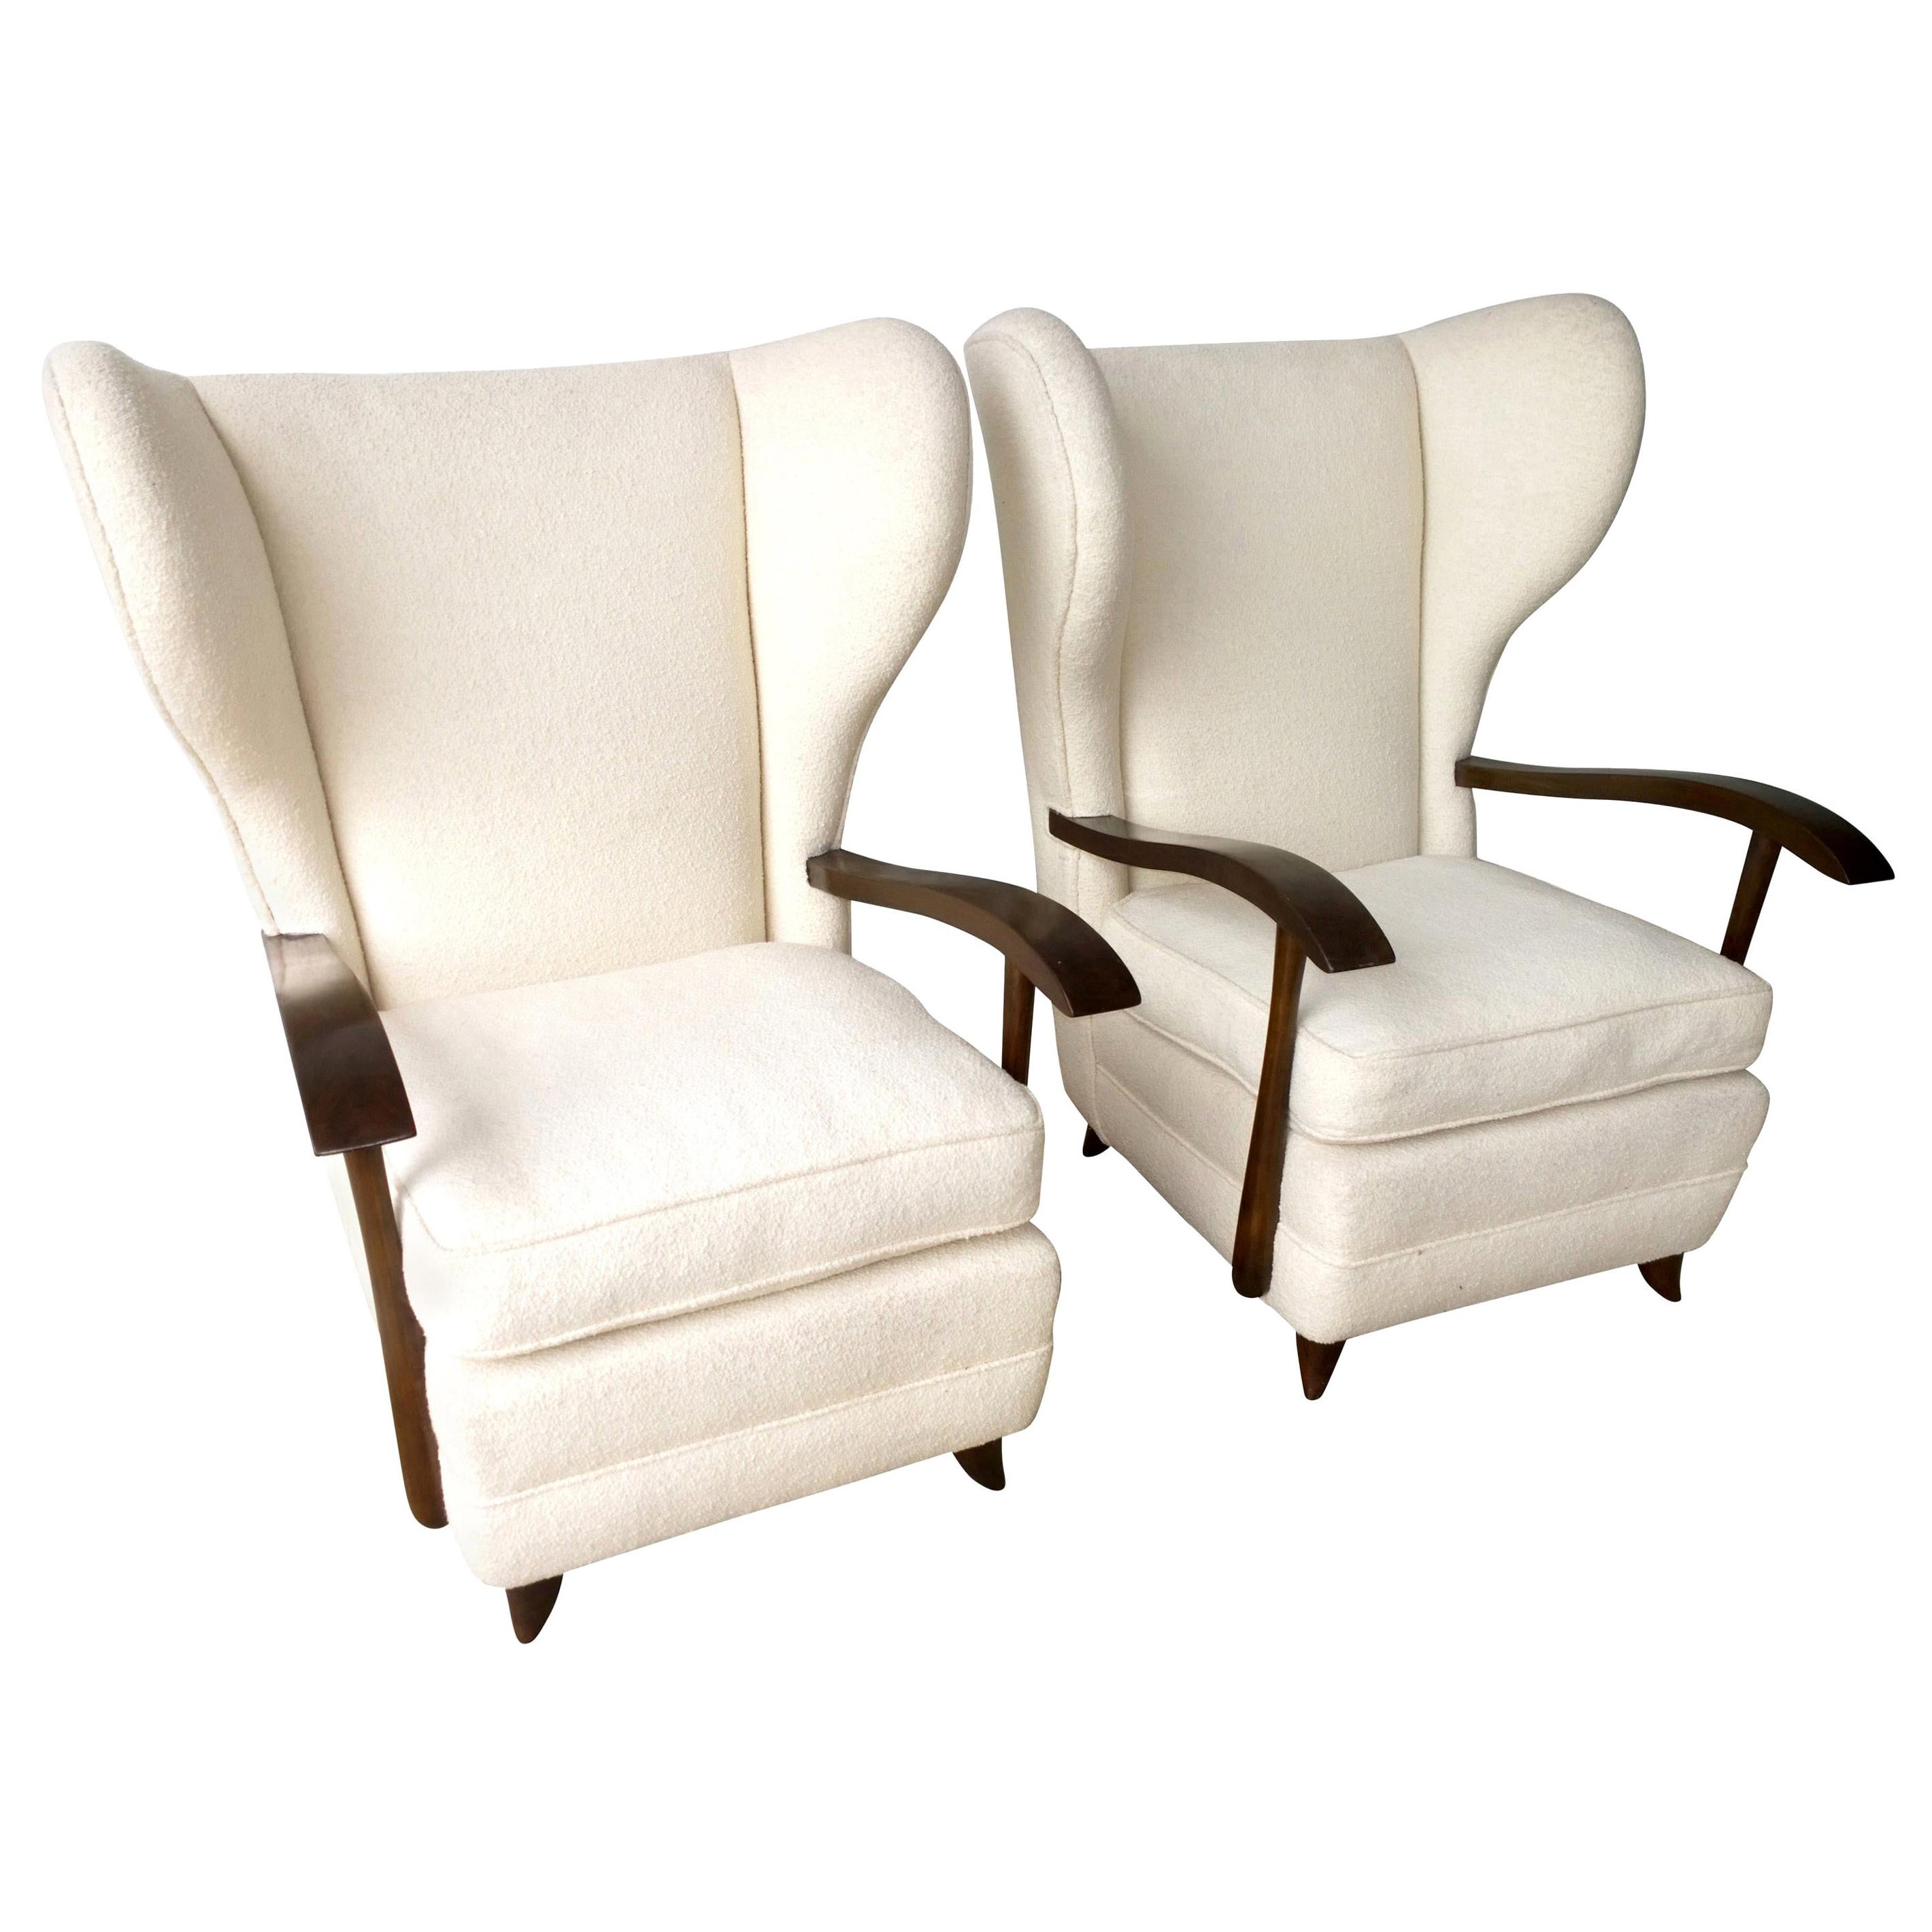 Pair of Paola Buffa Mahogany Frame and White Wool Boucle Arm or Lounge Chairs For Sale